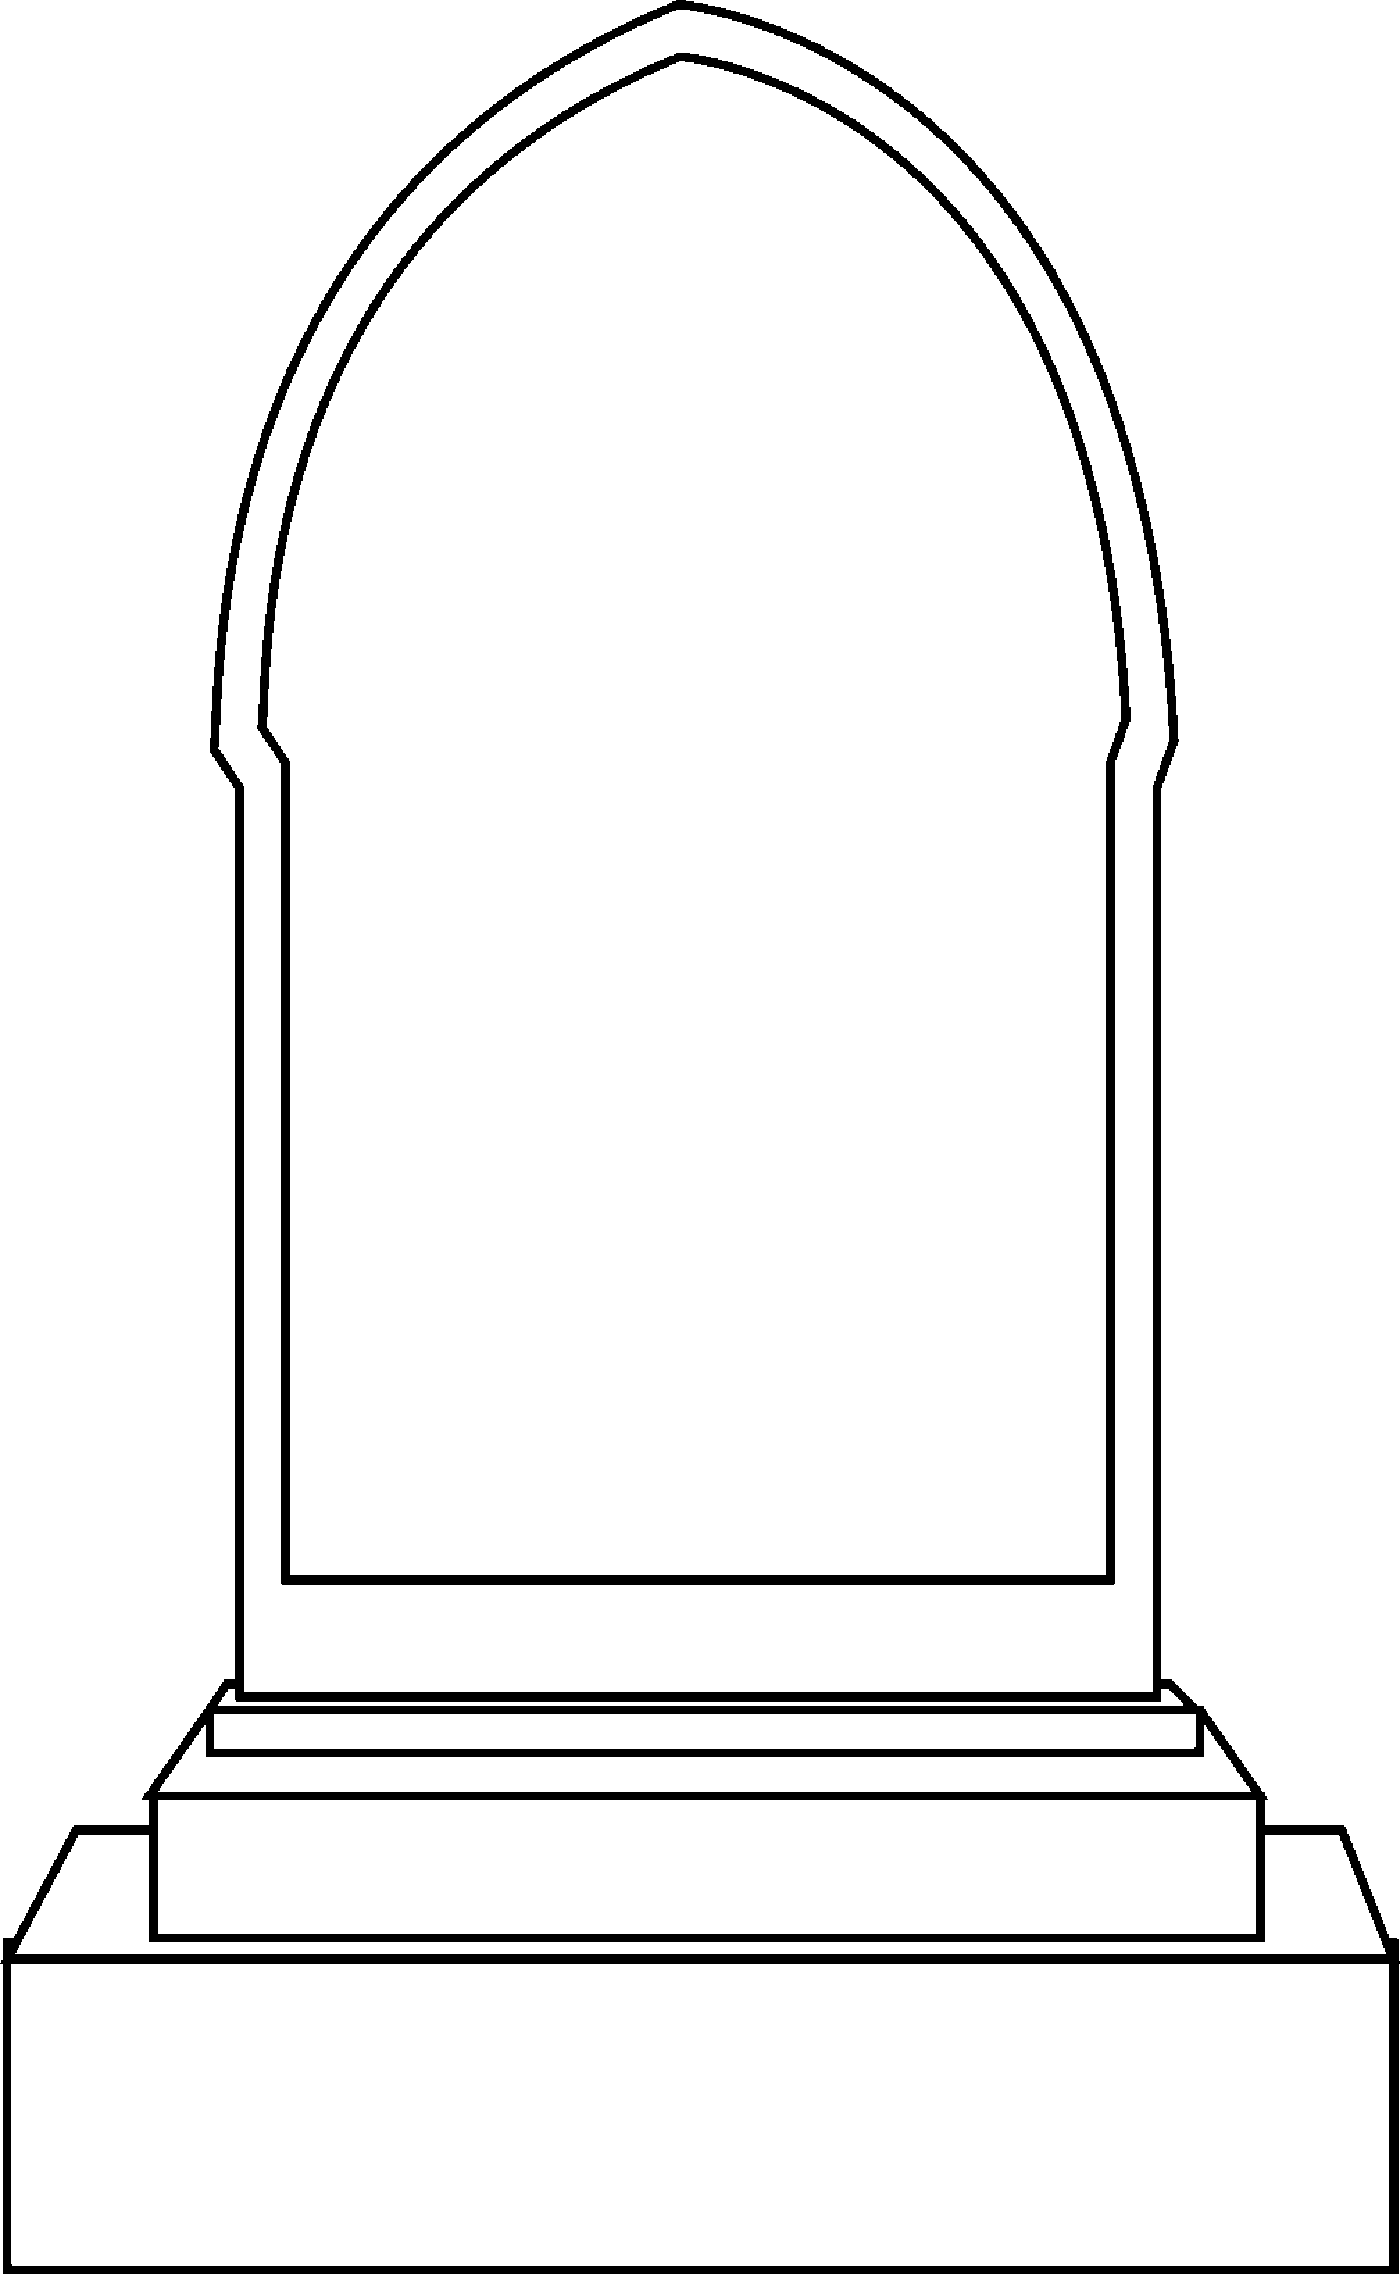 tombstone-coloring-page-cliparts-co